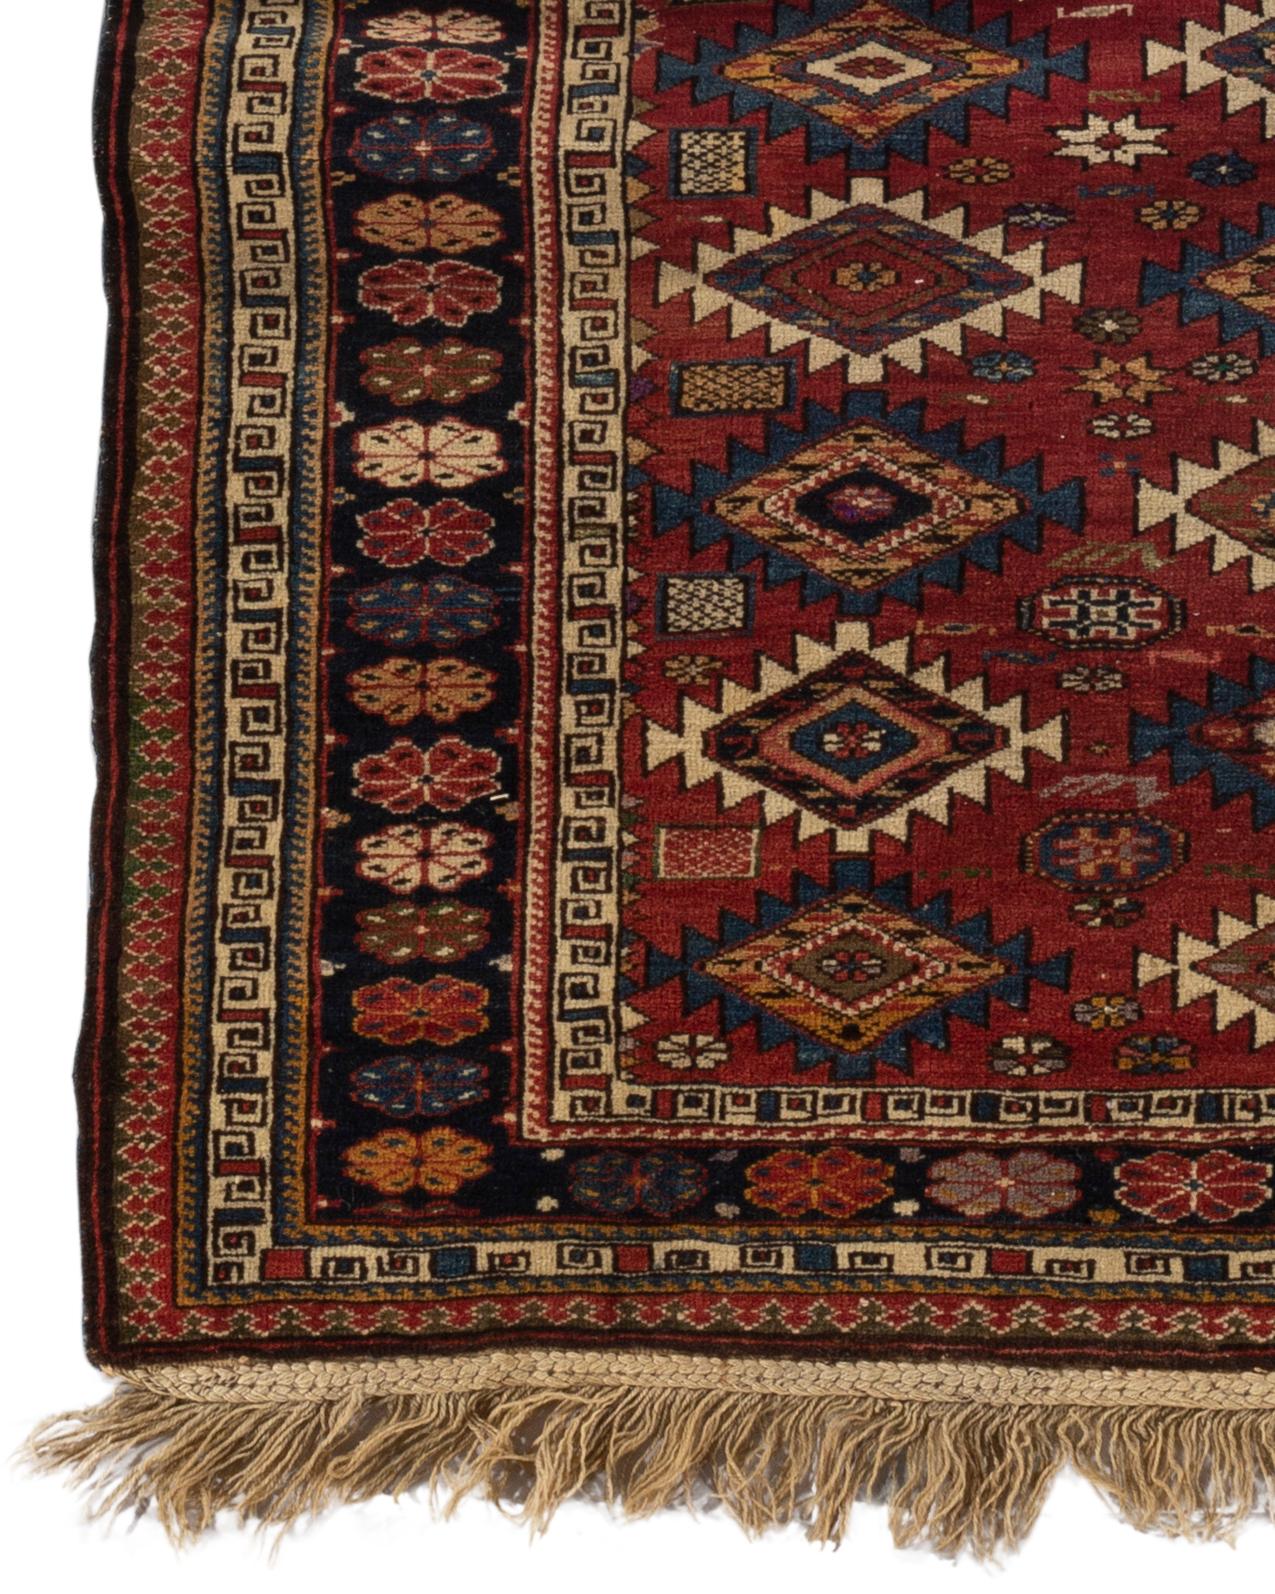 Antique Caucasian Shirvan rug, circa 1880. The field composed of diamonds with an ivory and blue outline enclosing flower heads within traditional Shirvan multiple borders framing the rug. These types of antique Caucasian rugs were woven in the